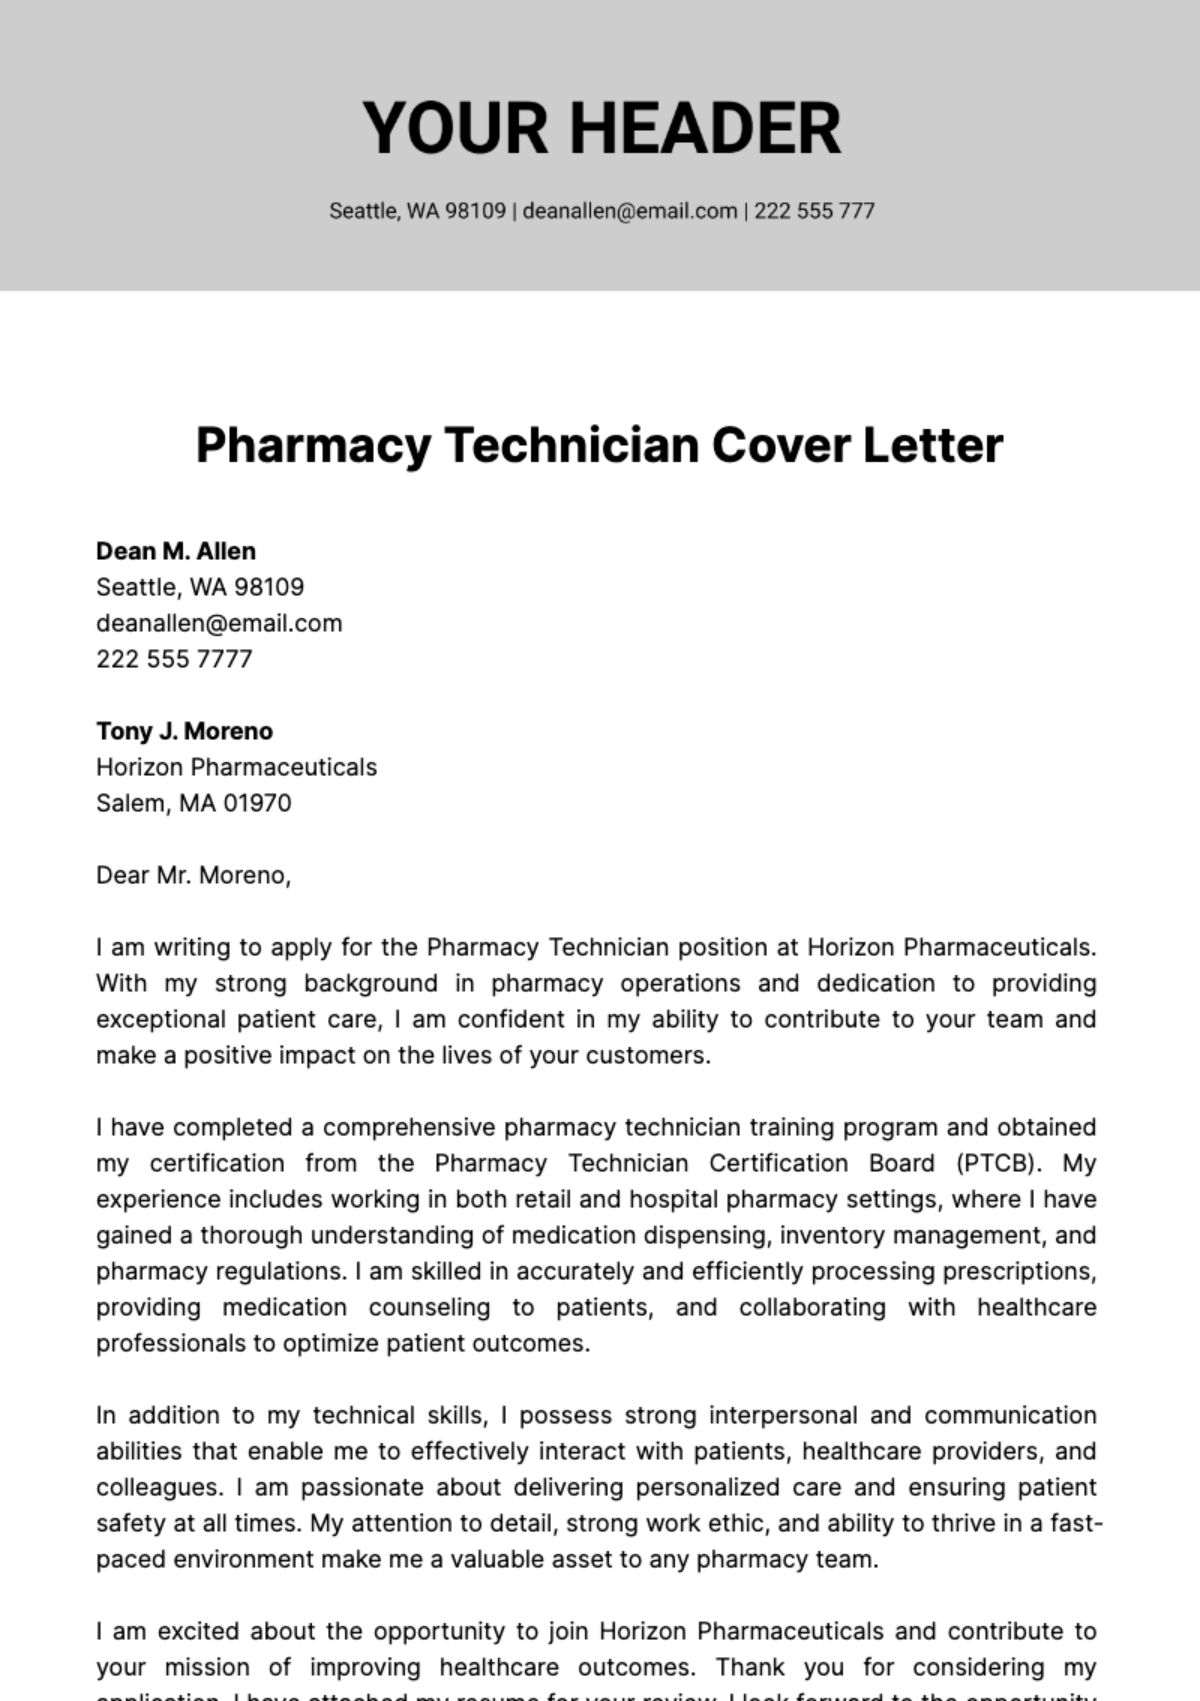 Free Pharmacy Technician Cover Letter  Template